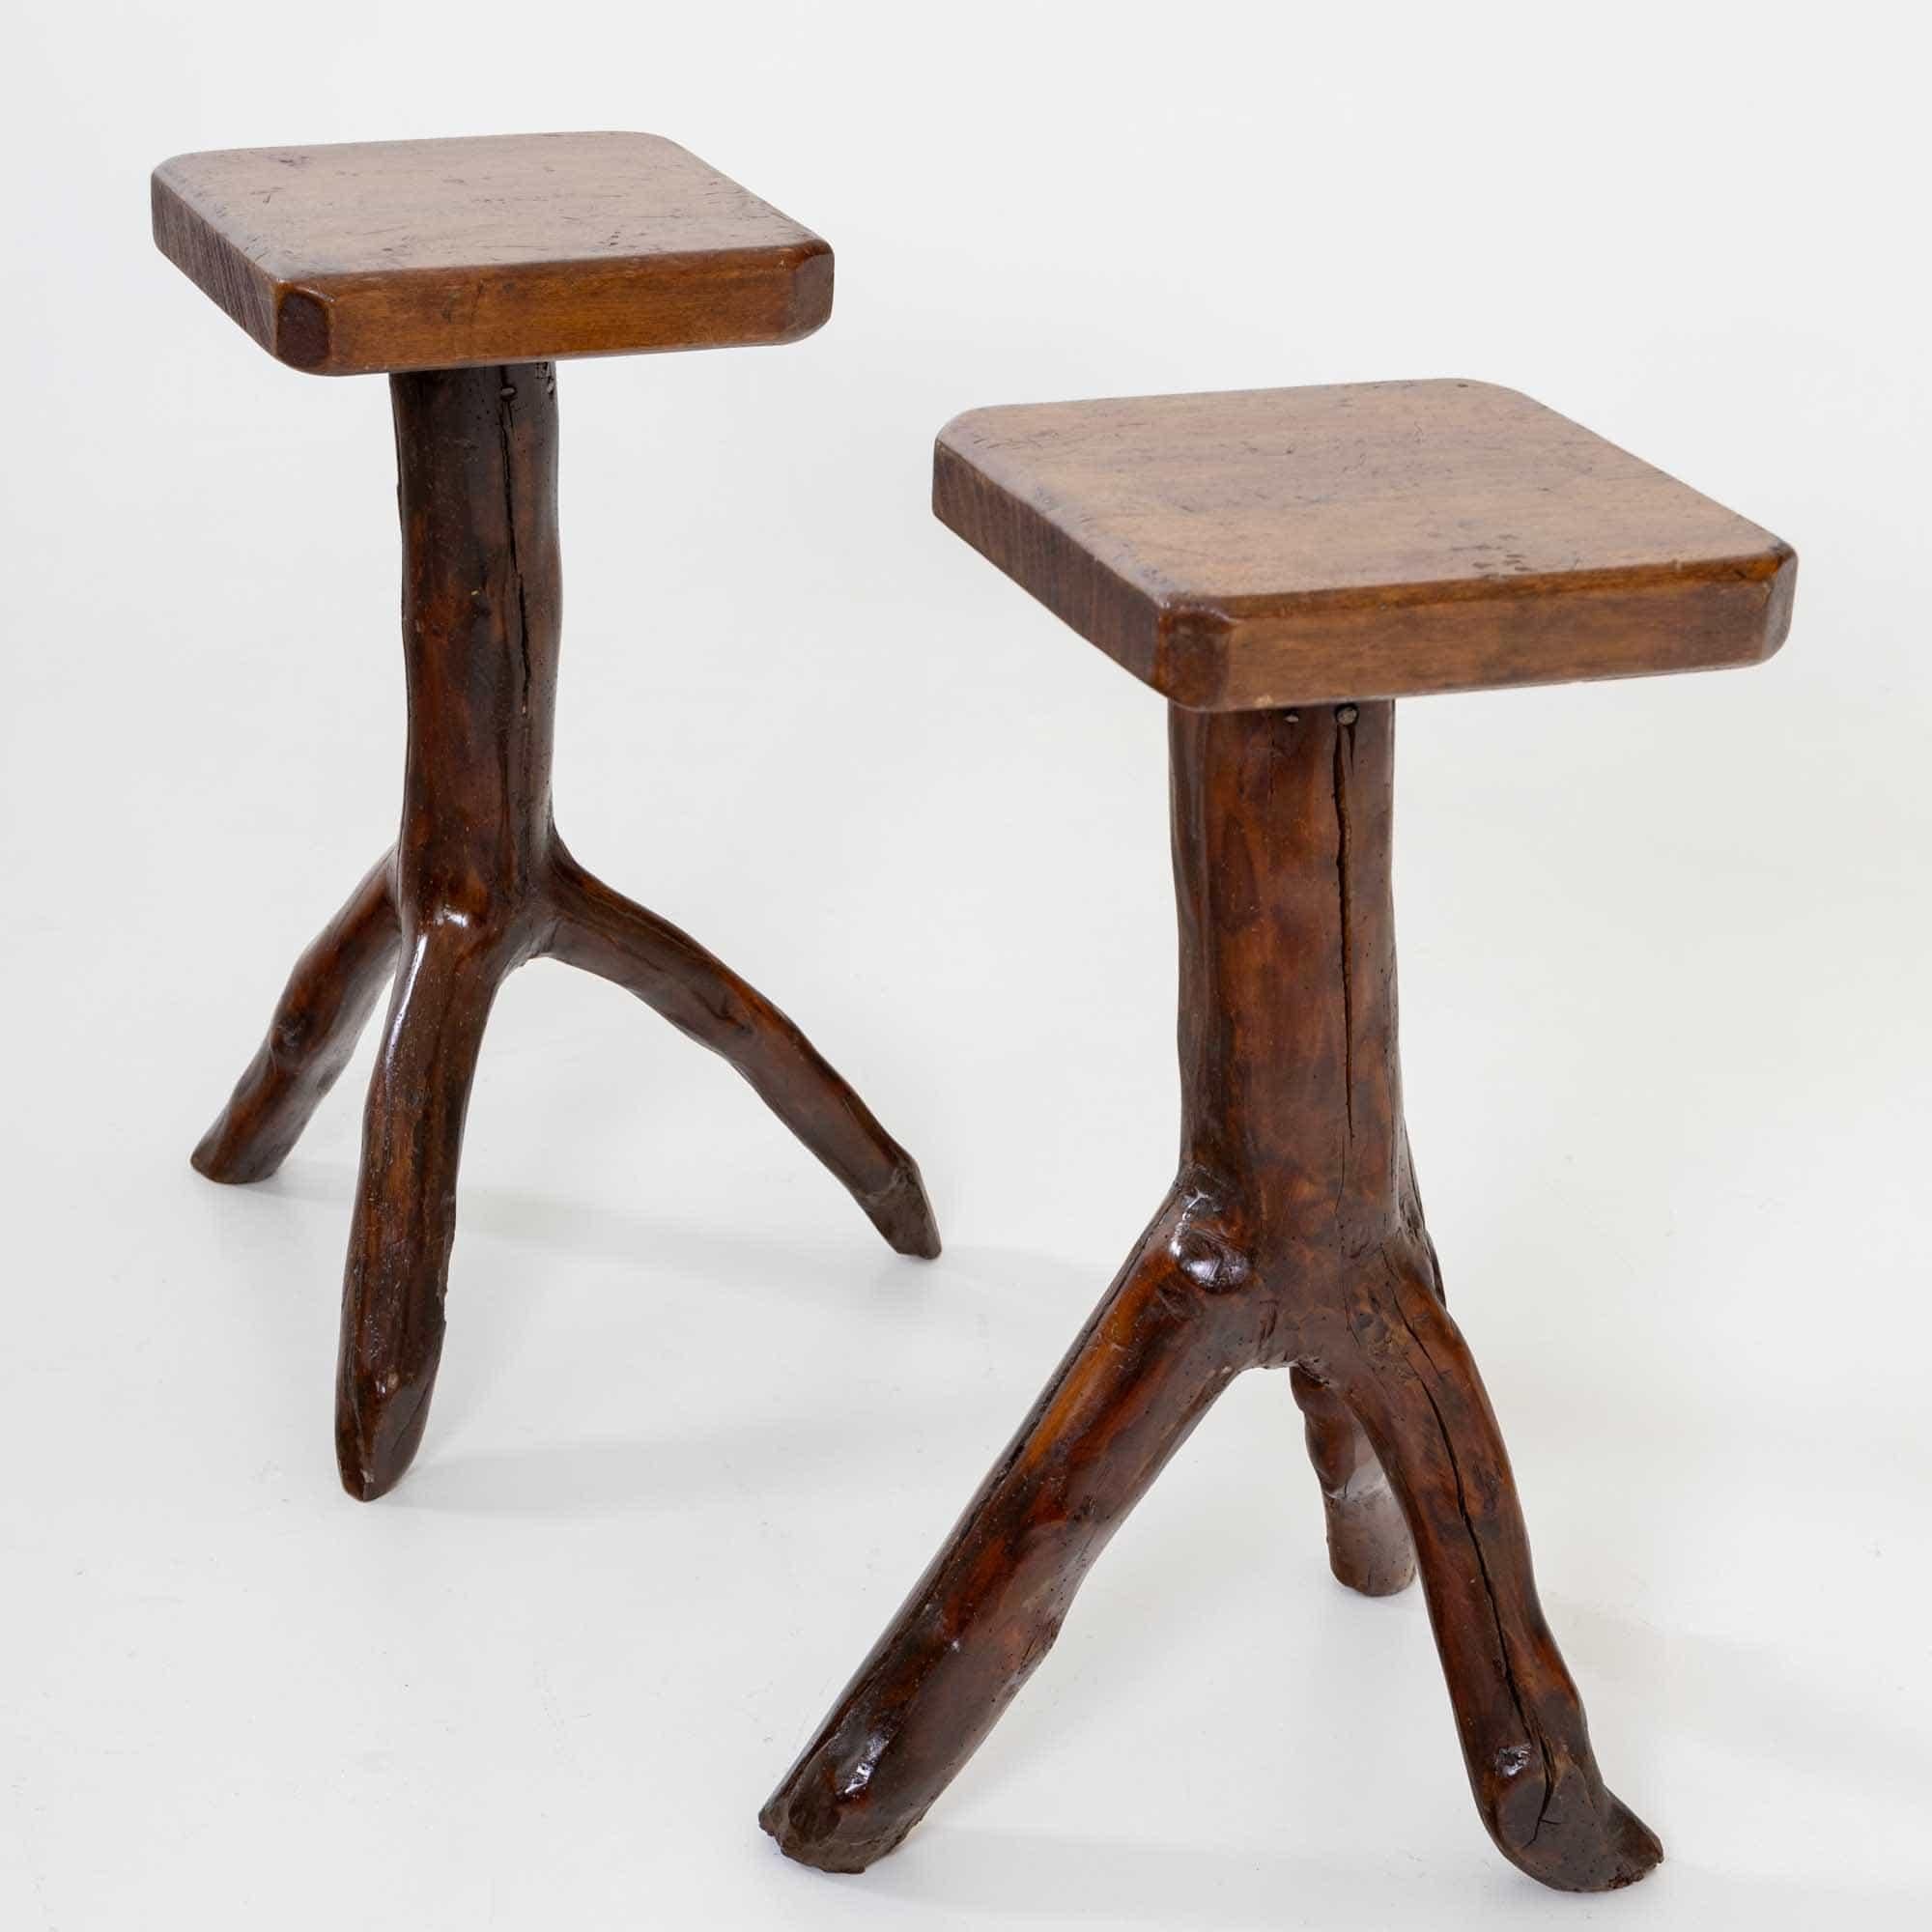 Pair of side tables with tabletops measuring 32 x 30 cm. The three-legged bases of the tables are made from natural tree branches and have been polished and waxed smooth.